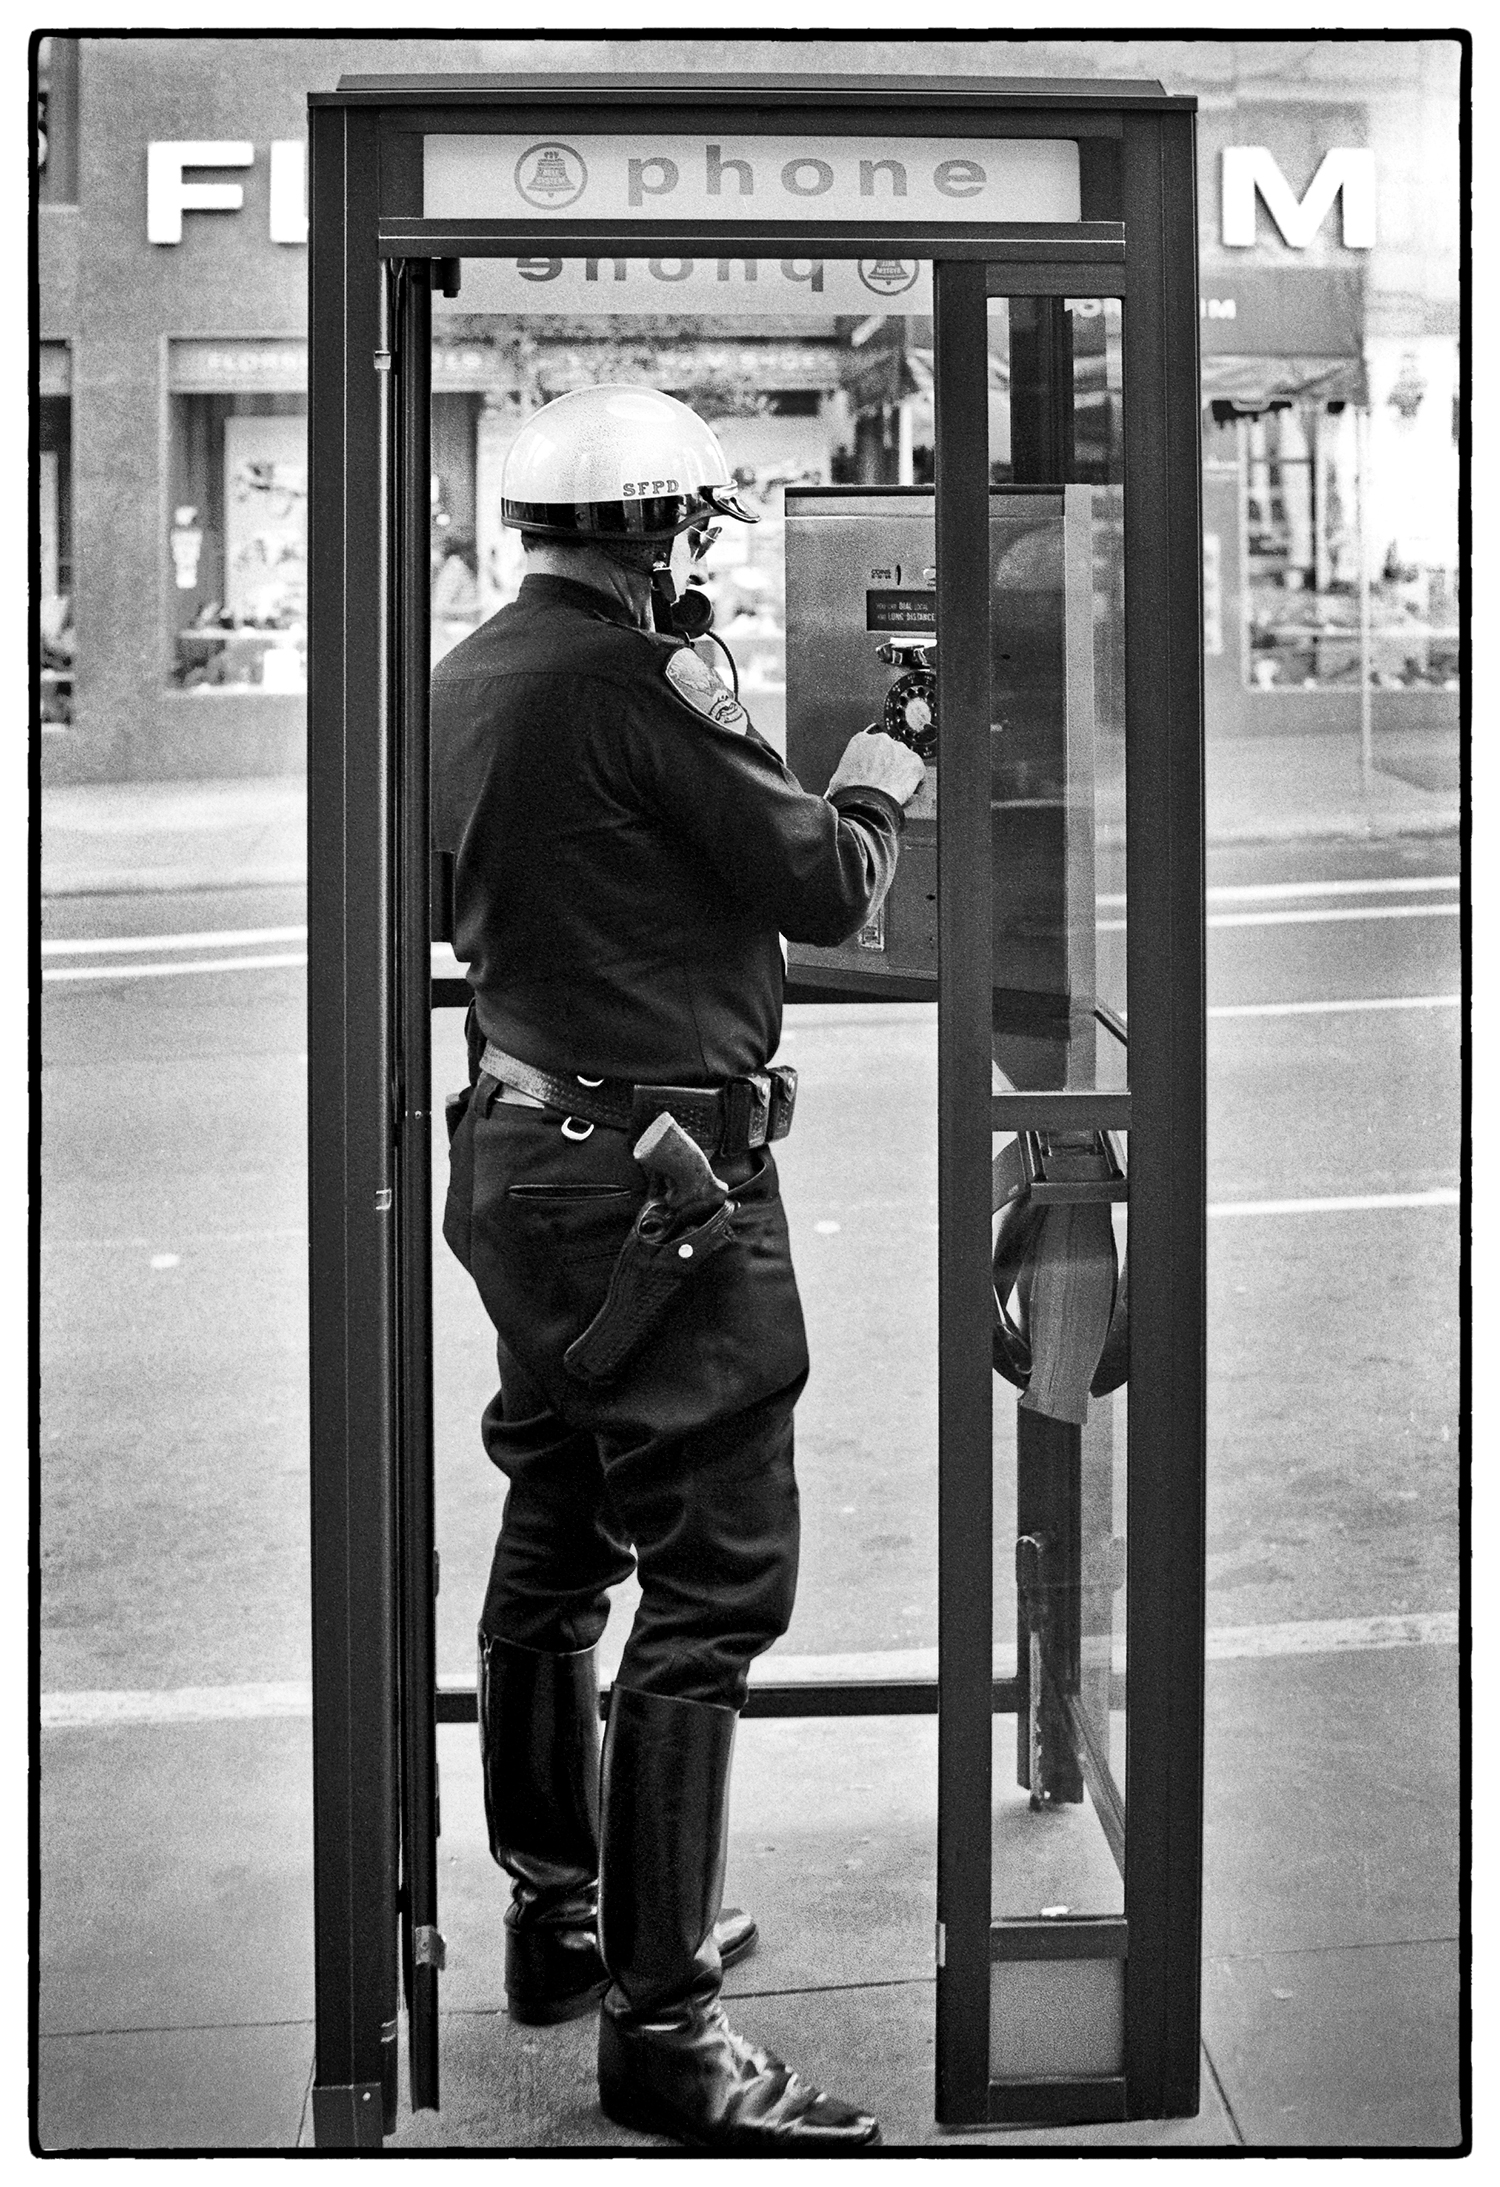 Cop In Phone Booth, San Francisco, 1972